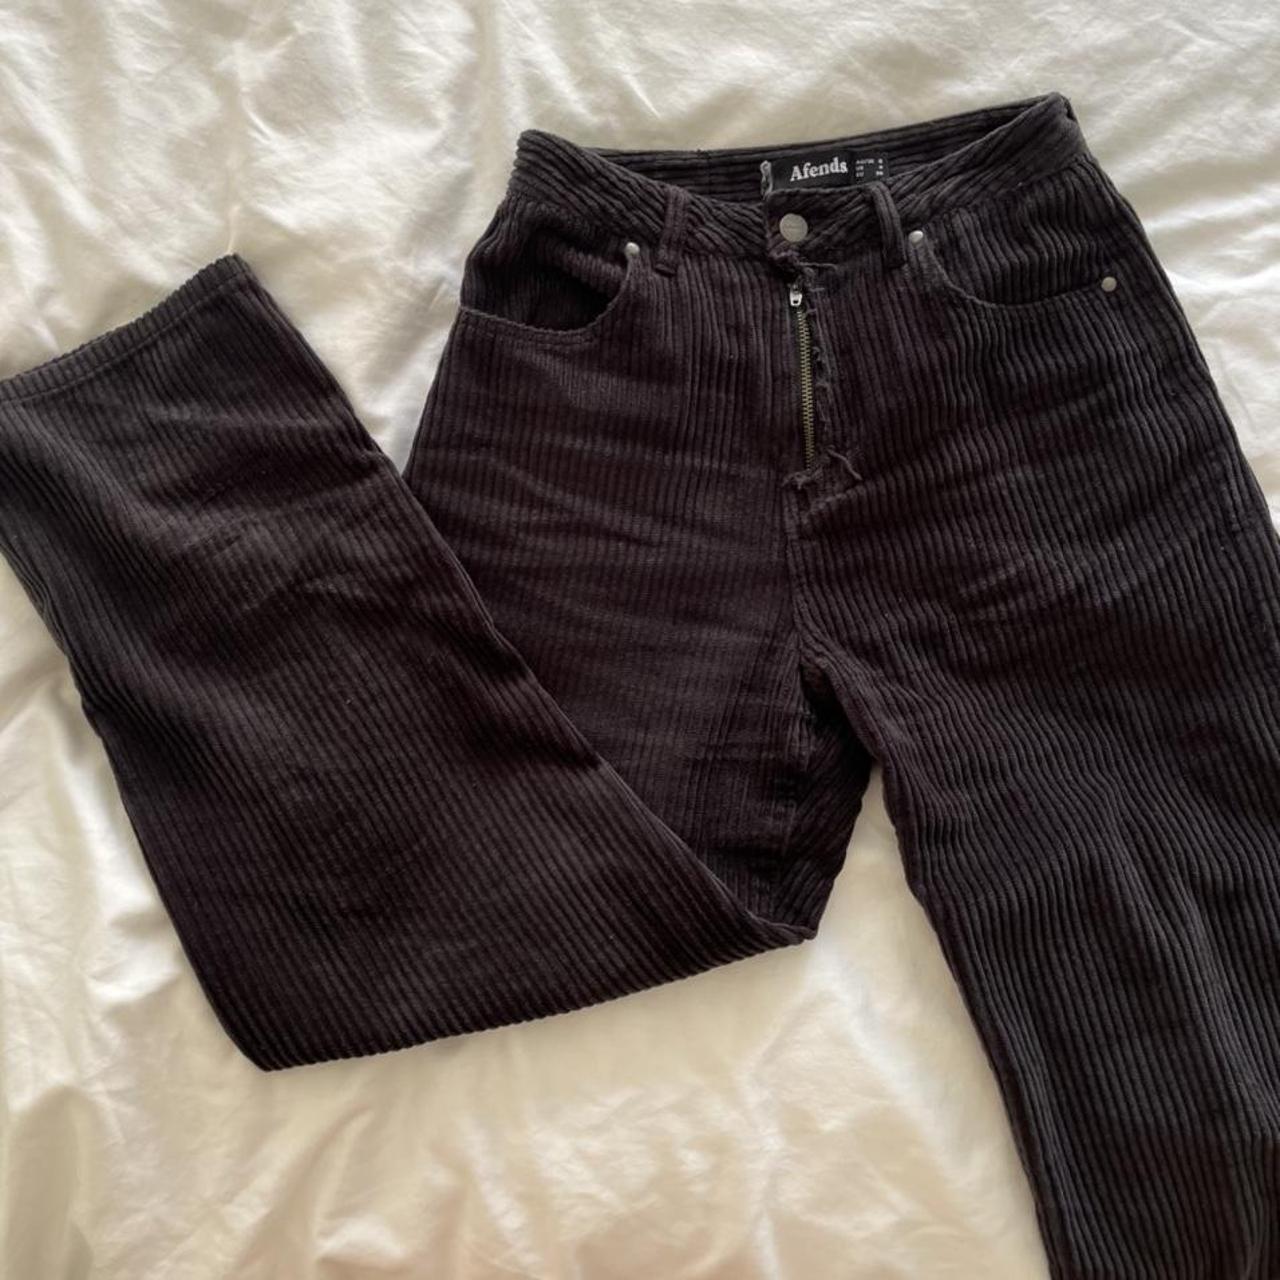 Afends Women's Black Trousers (2)